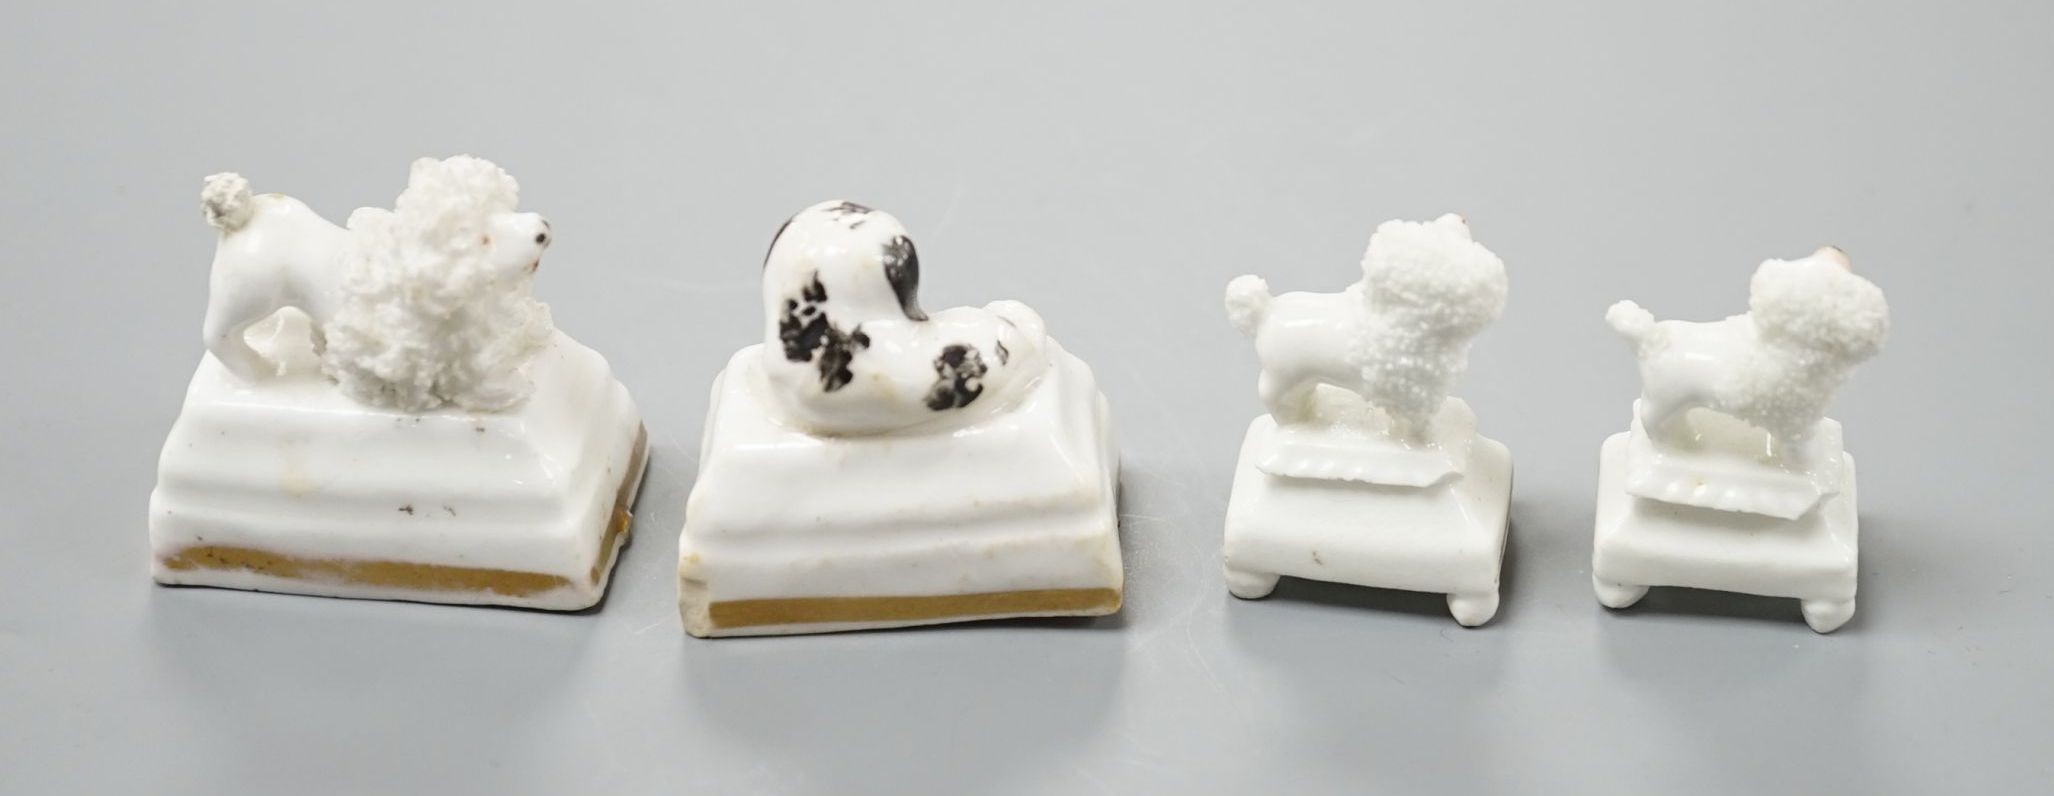 Four Staffordshire porcelain toy models of poodles and a King Charles spaniel puppy, c.1835-50, tallest 3.5 cm, Cf. Dennis G.Rice Dogs in English porcelain, colour plate 154., Provenance: Dennis G.Rice collection